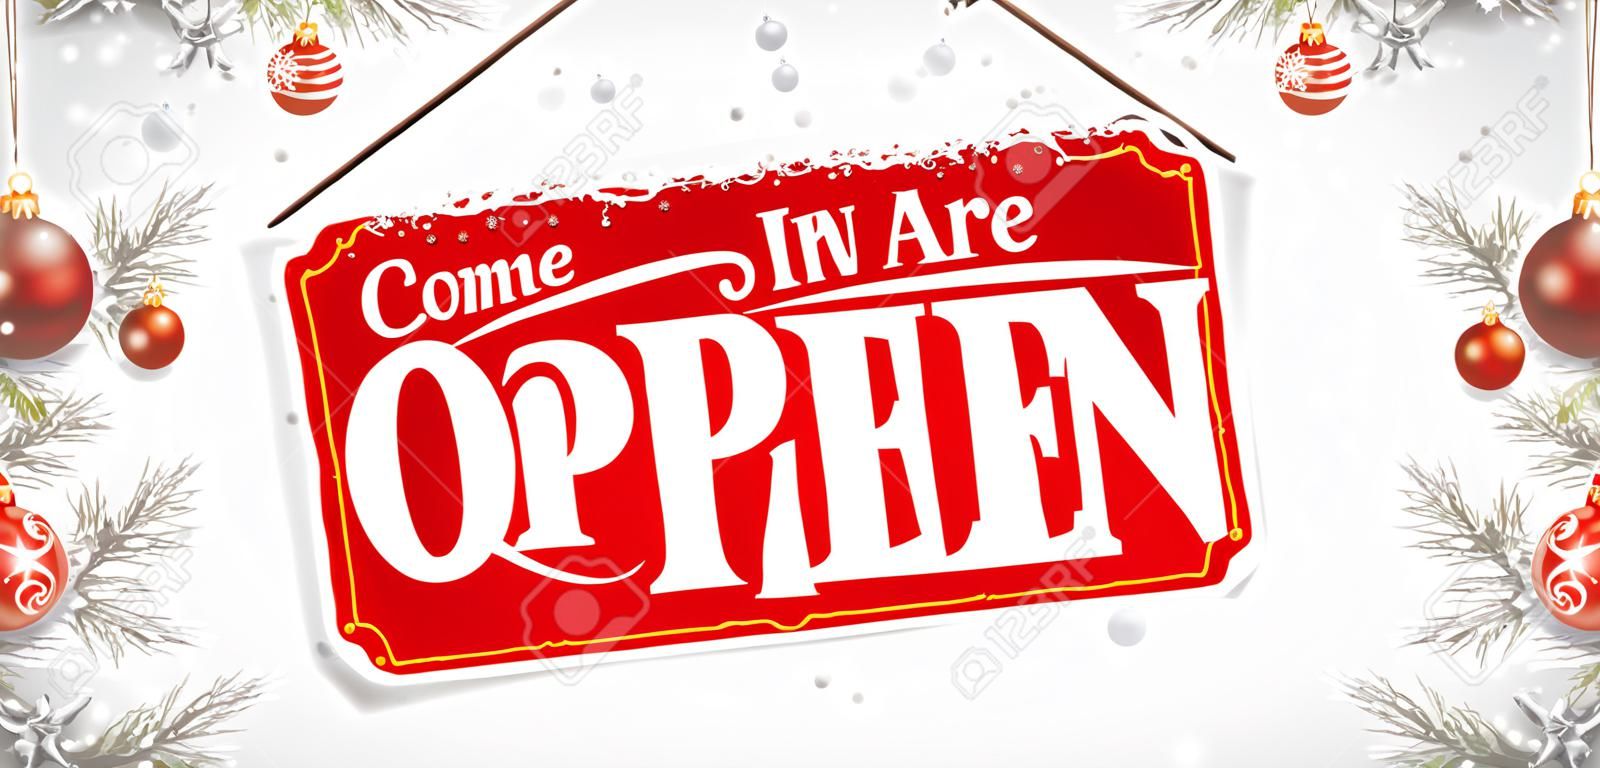 Christmas twigs with the sign and text Come in, We are open. Eps 10 vector file.